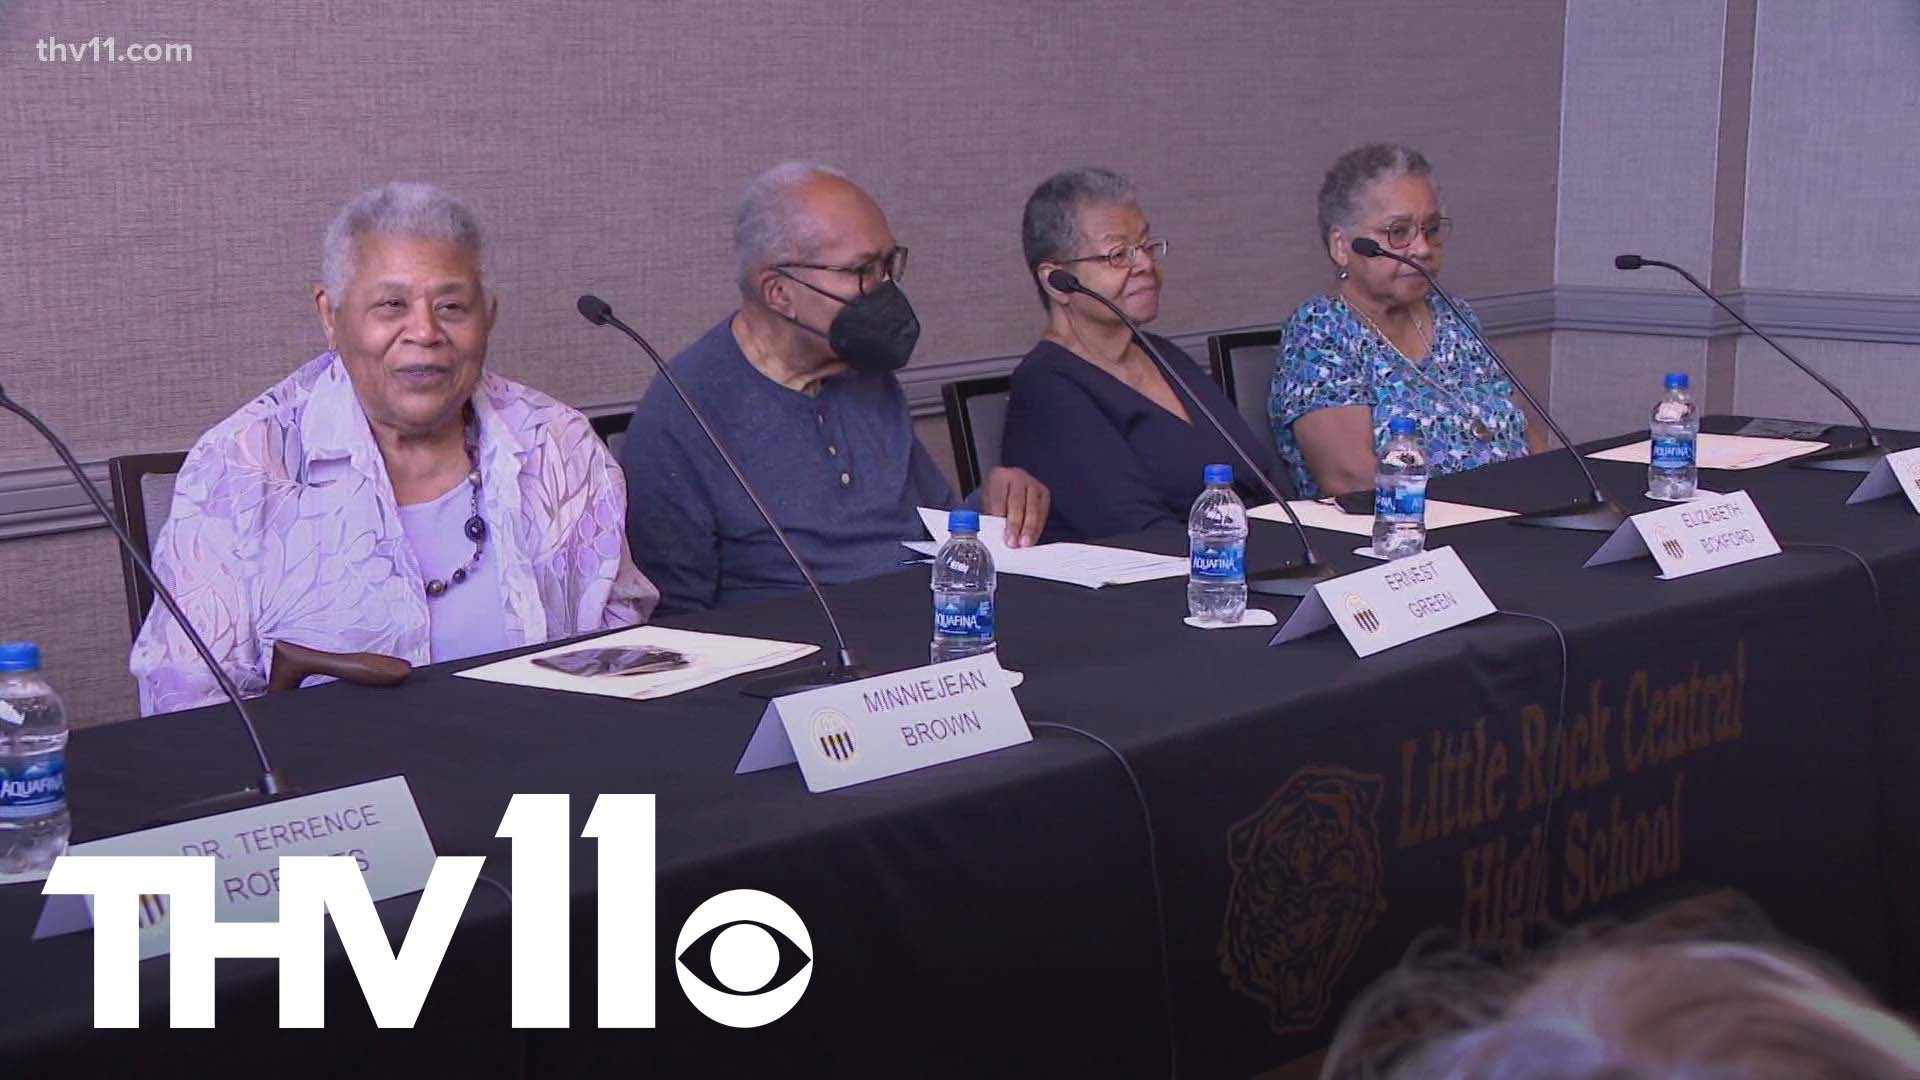 Today, five of the former Little Rock 9 students joined together to reflect on the difference they made— however, they said that the fight for change is not over.